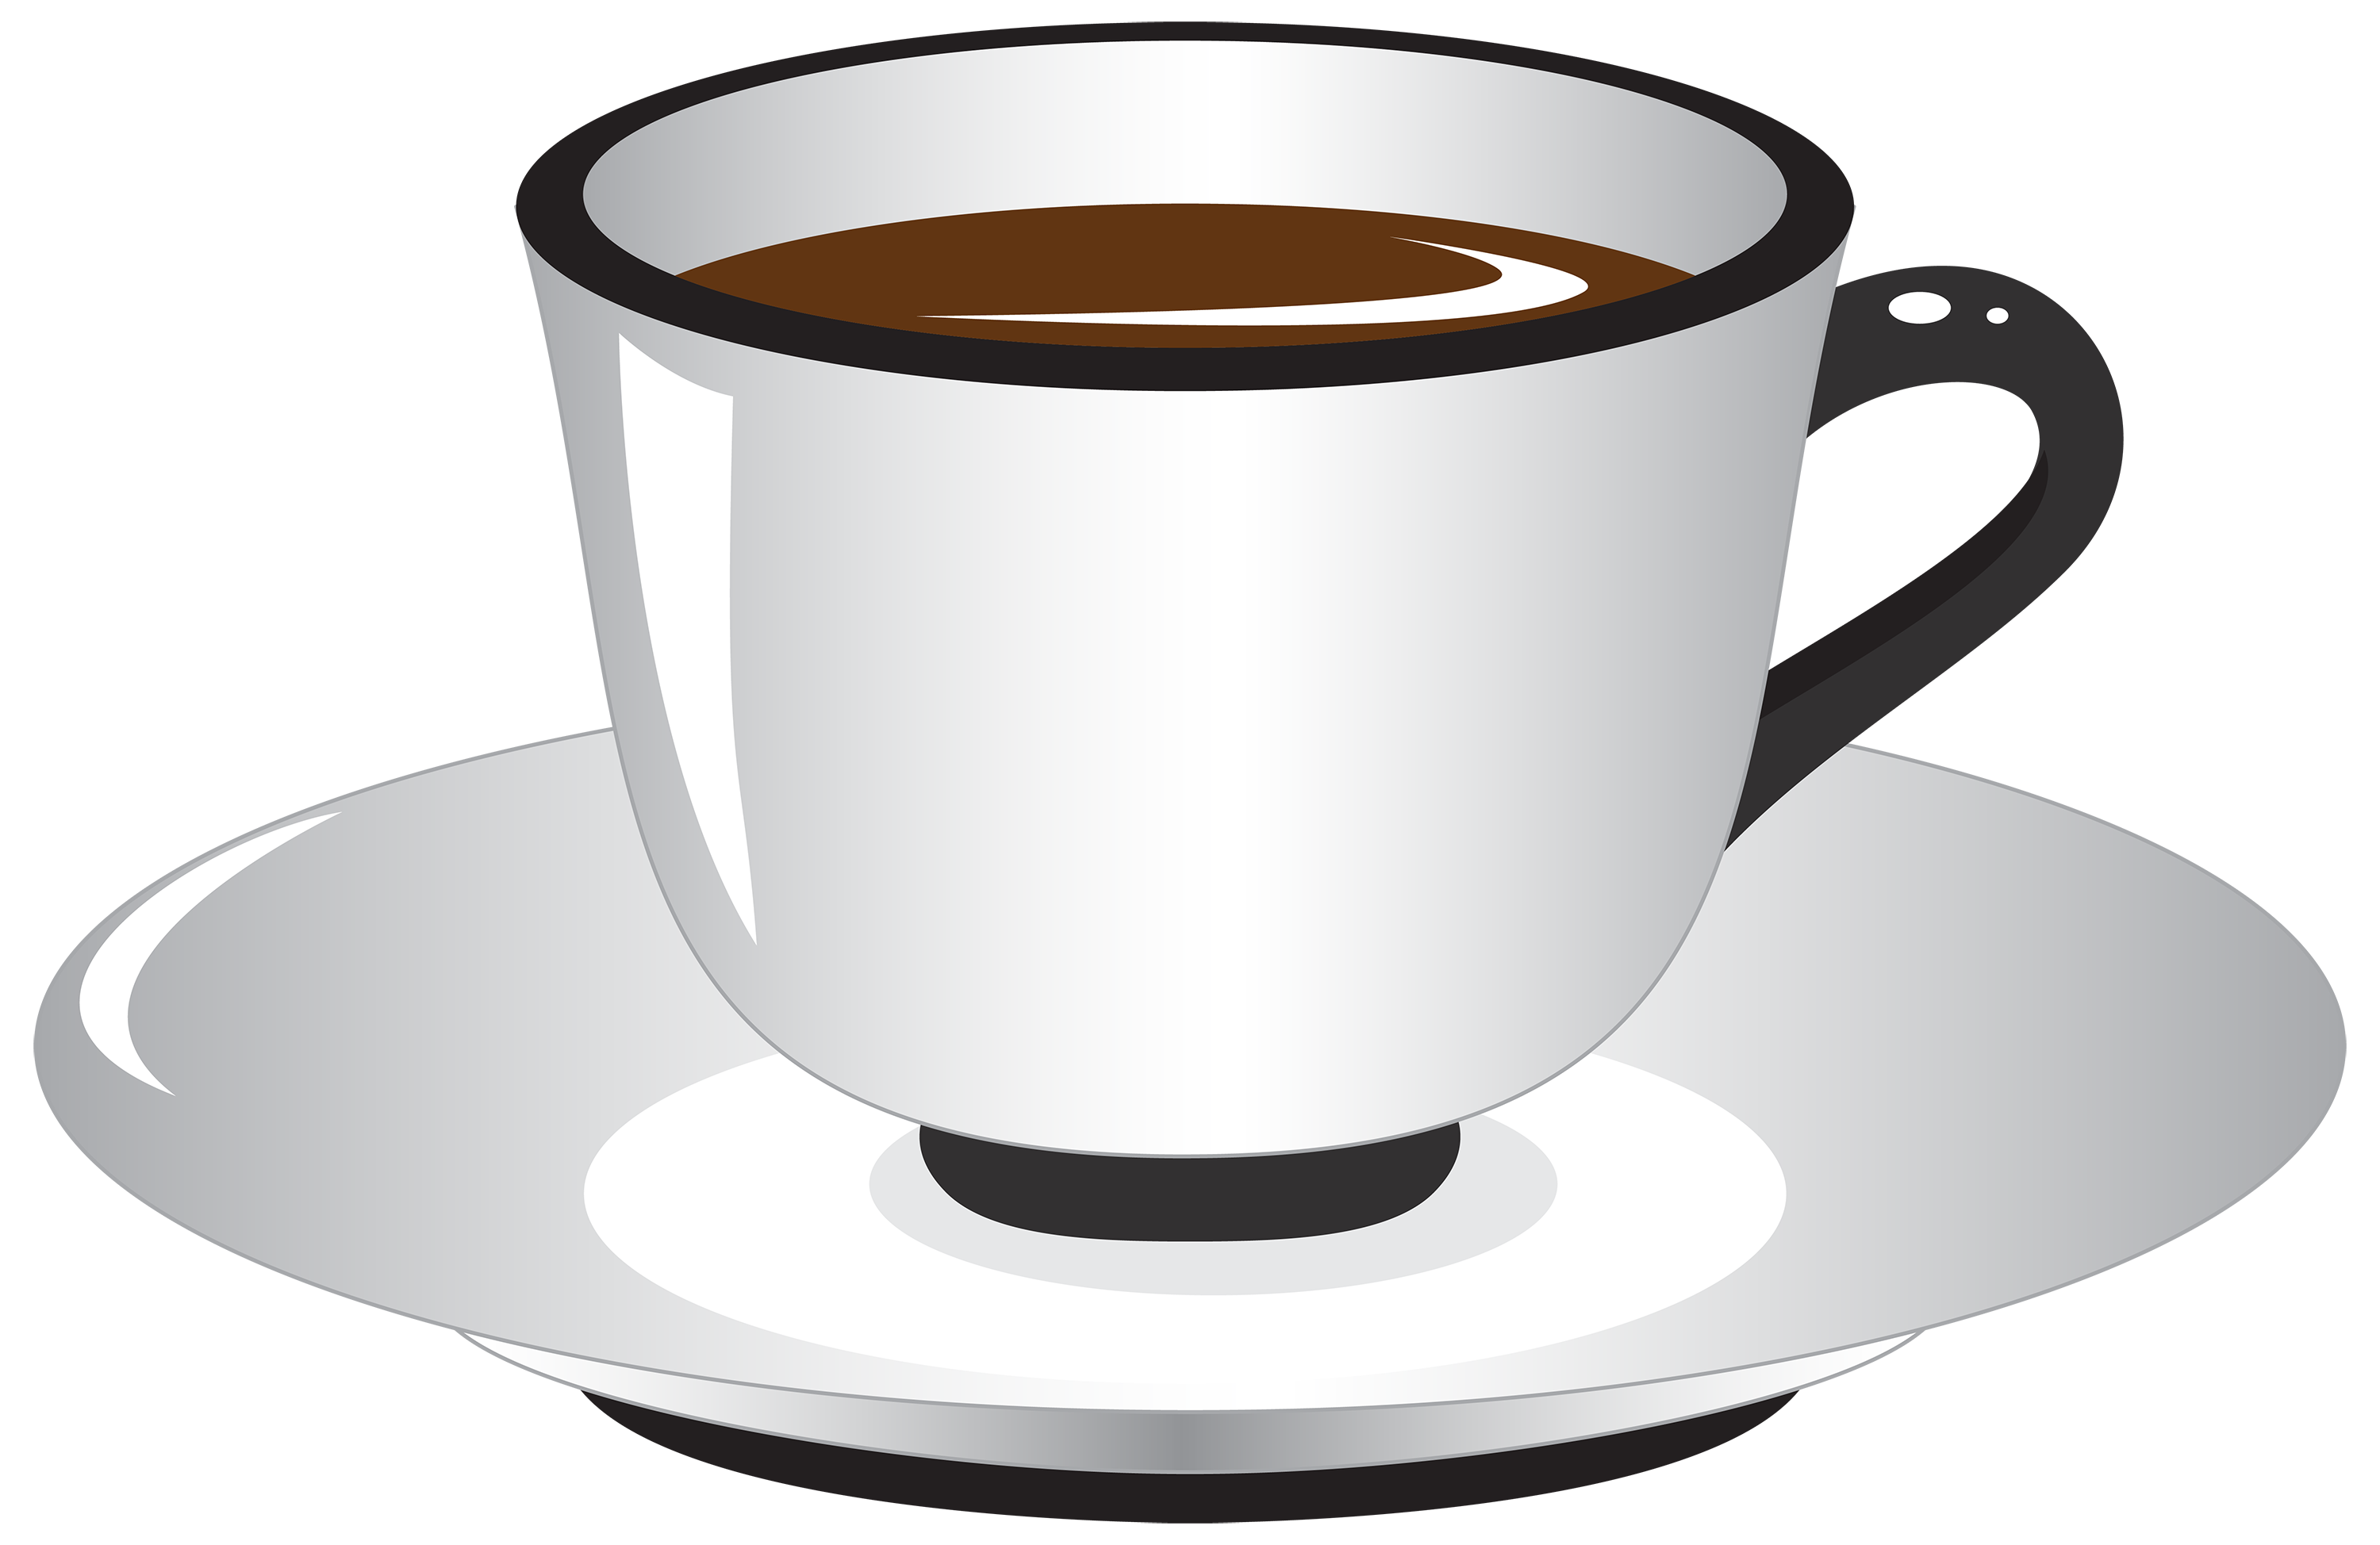 Coffee cup coffee mug clip art free vector for download about 2 